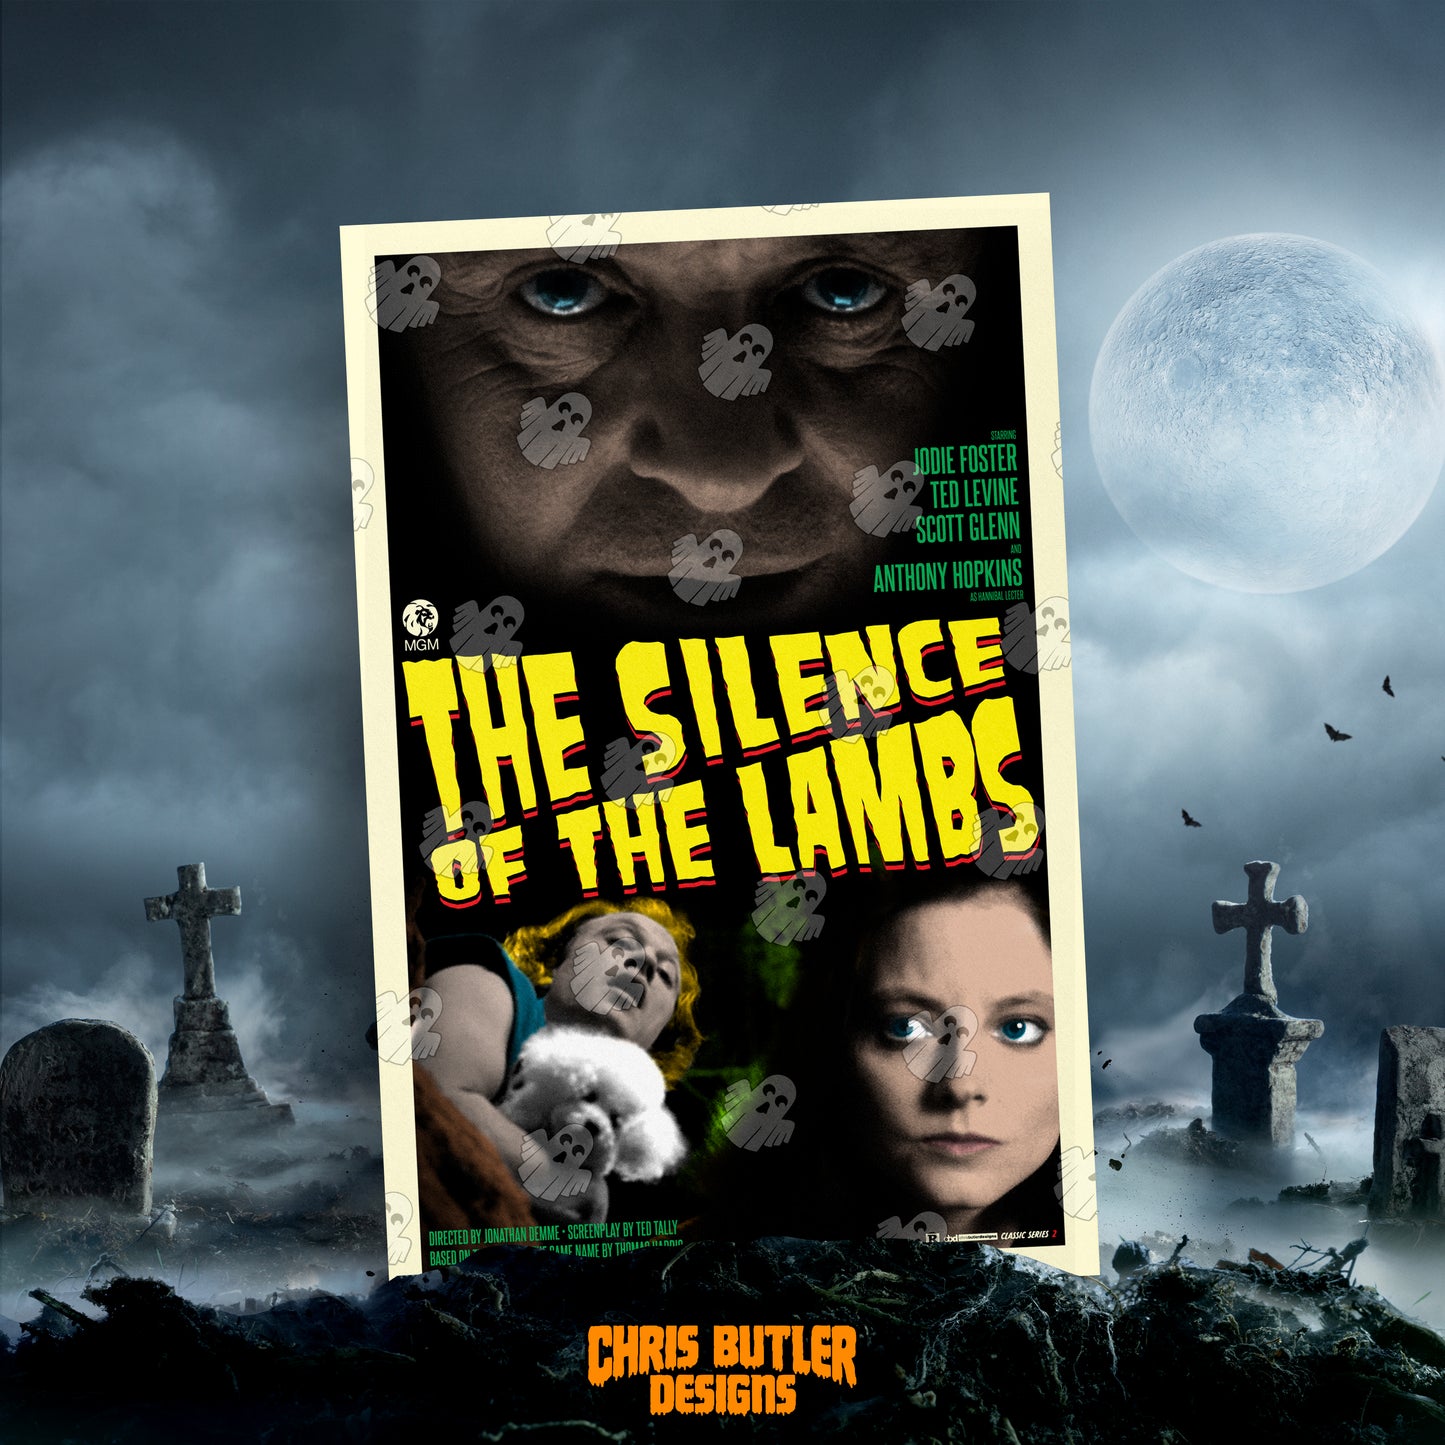 The Silence Of The Lambs (Classic Series 2) 11x17 Alternative Movie Poster